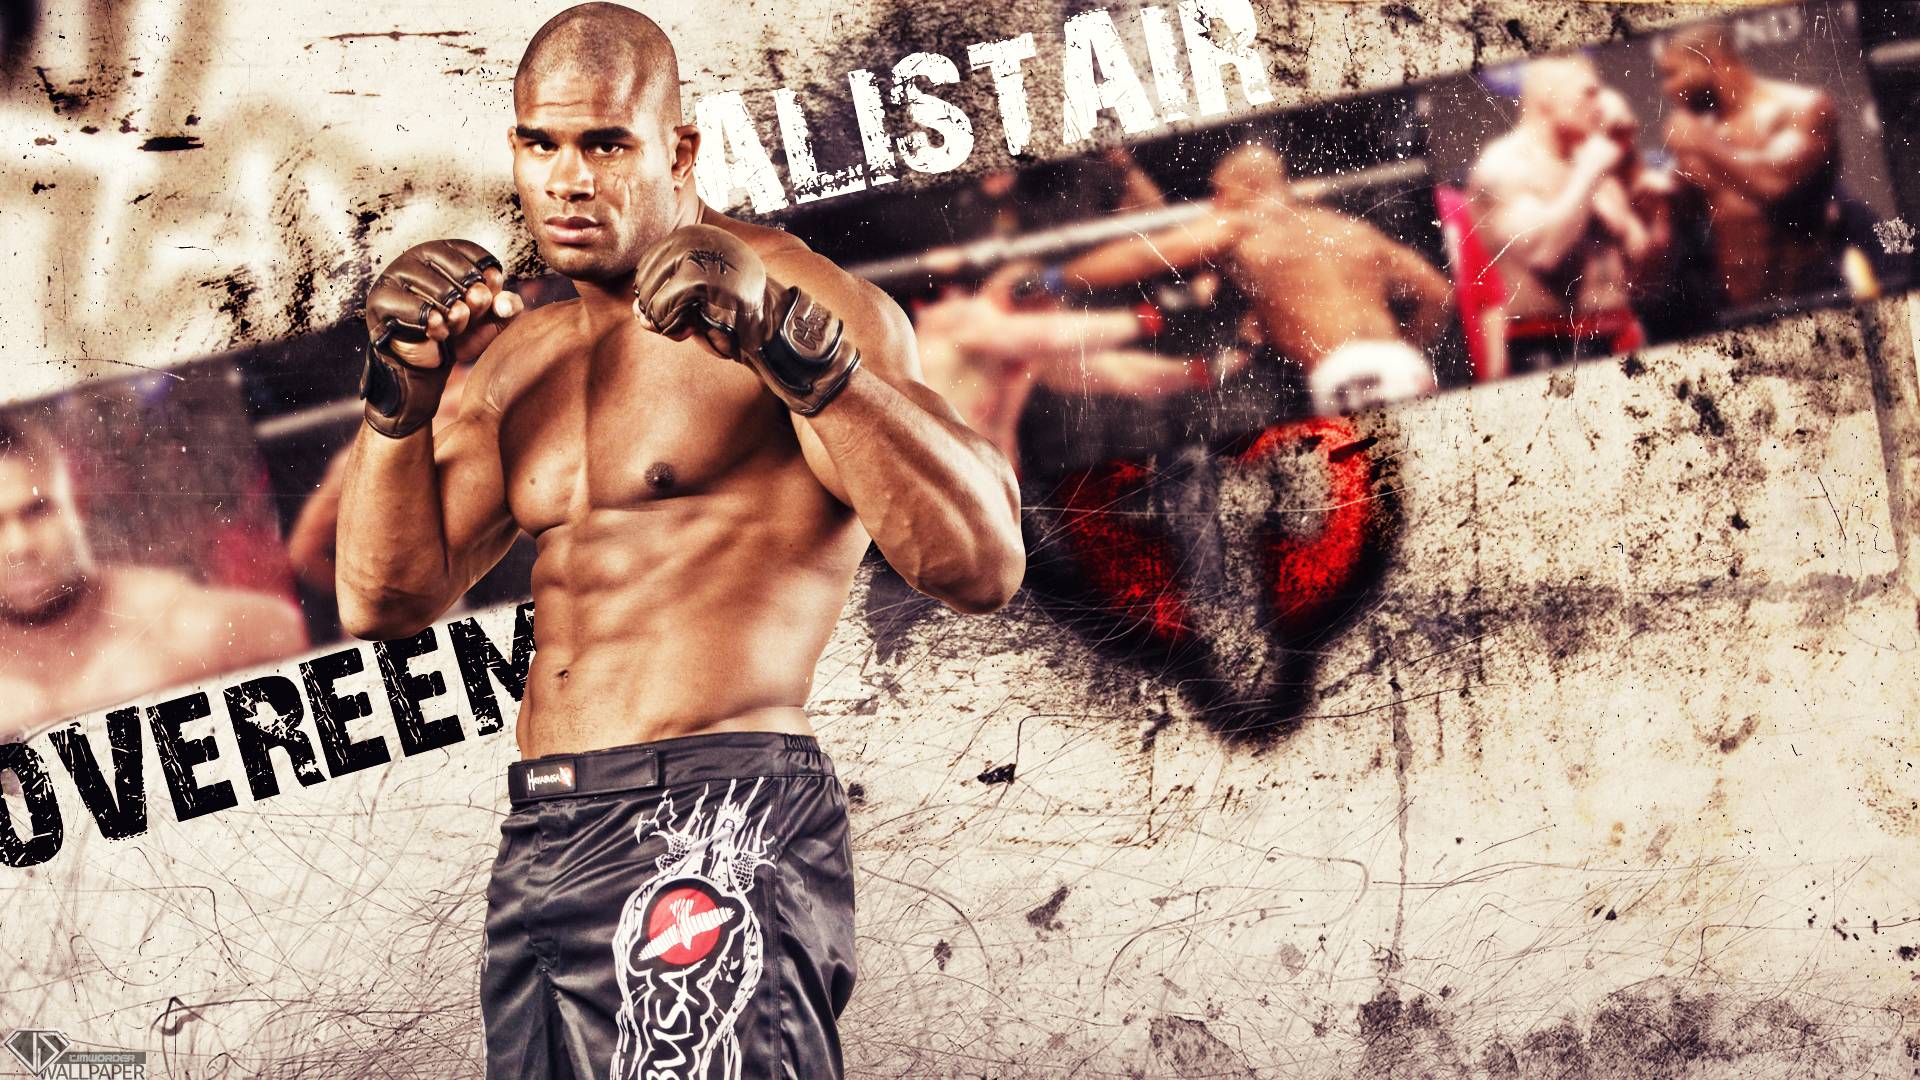 image For > Ufc Fighters Wallpaper